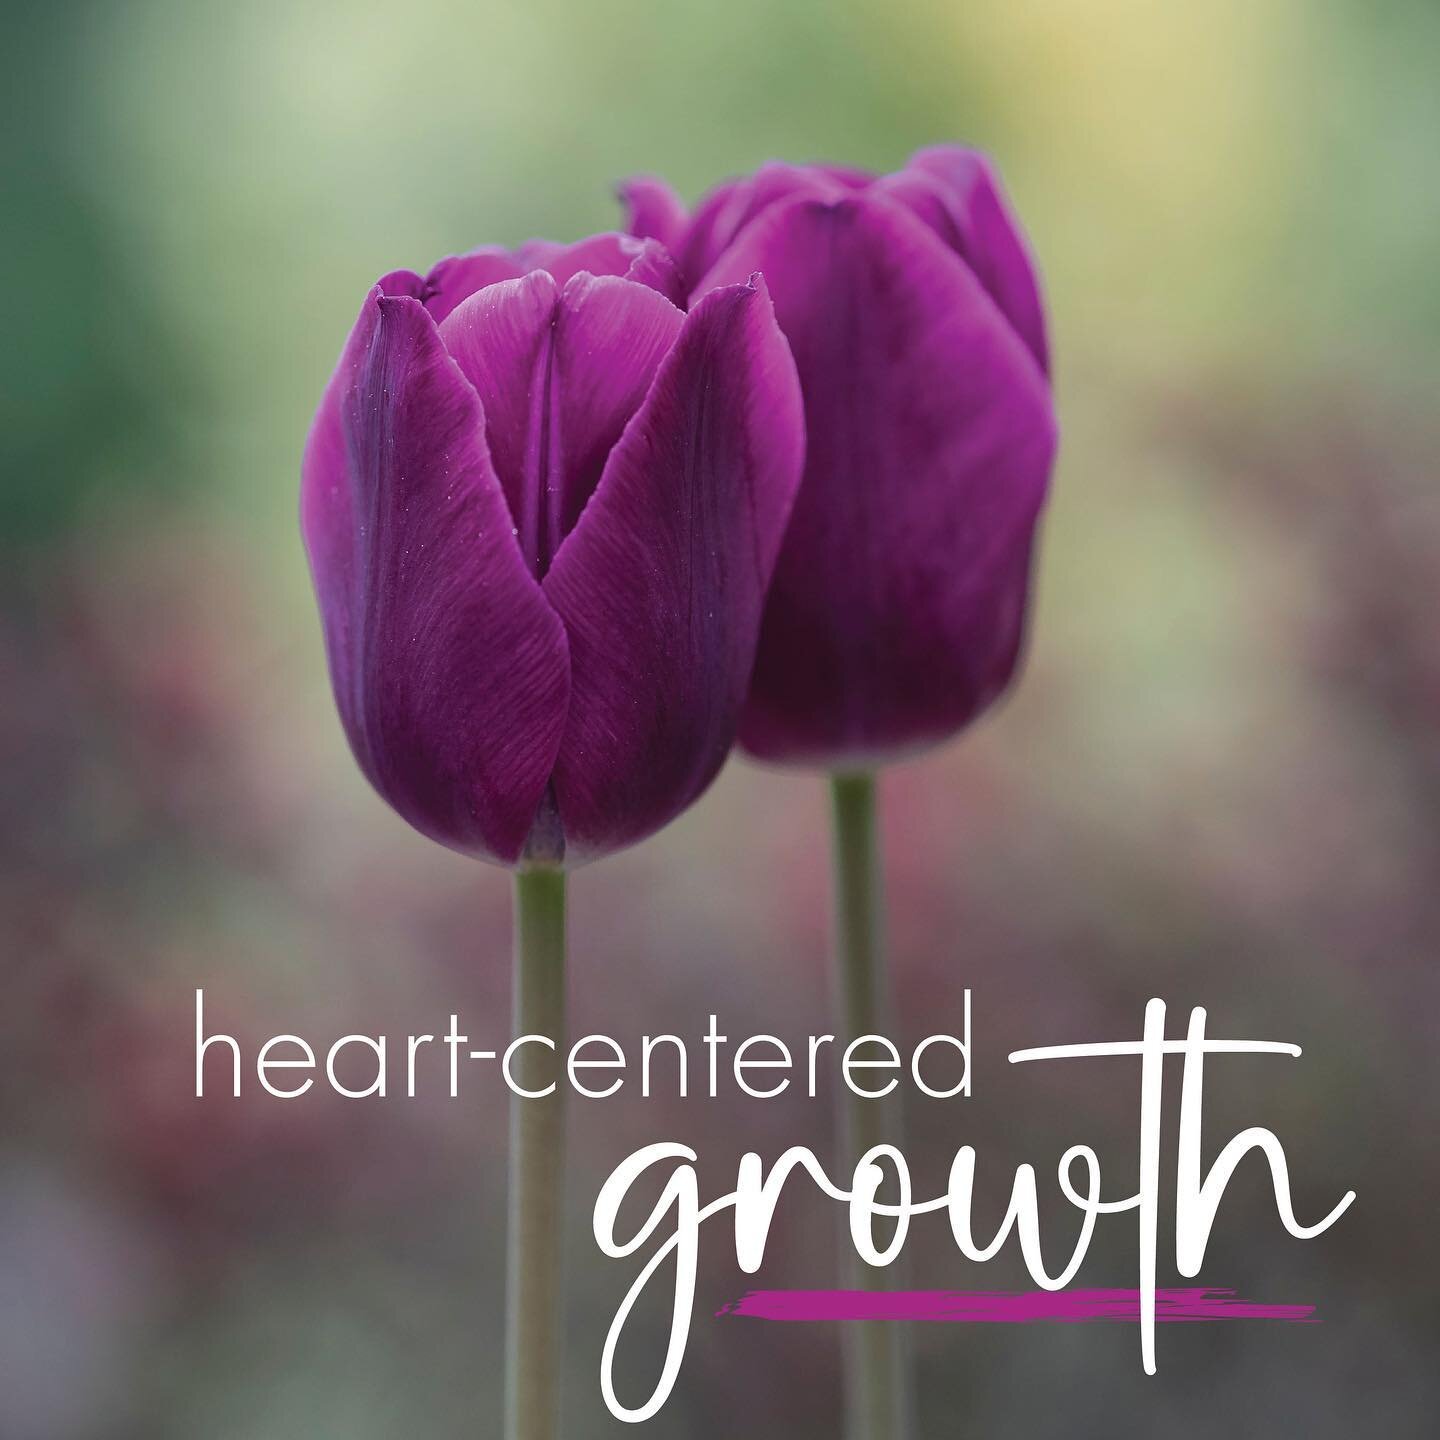 Elevate your life with heart-centered practices.